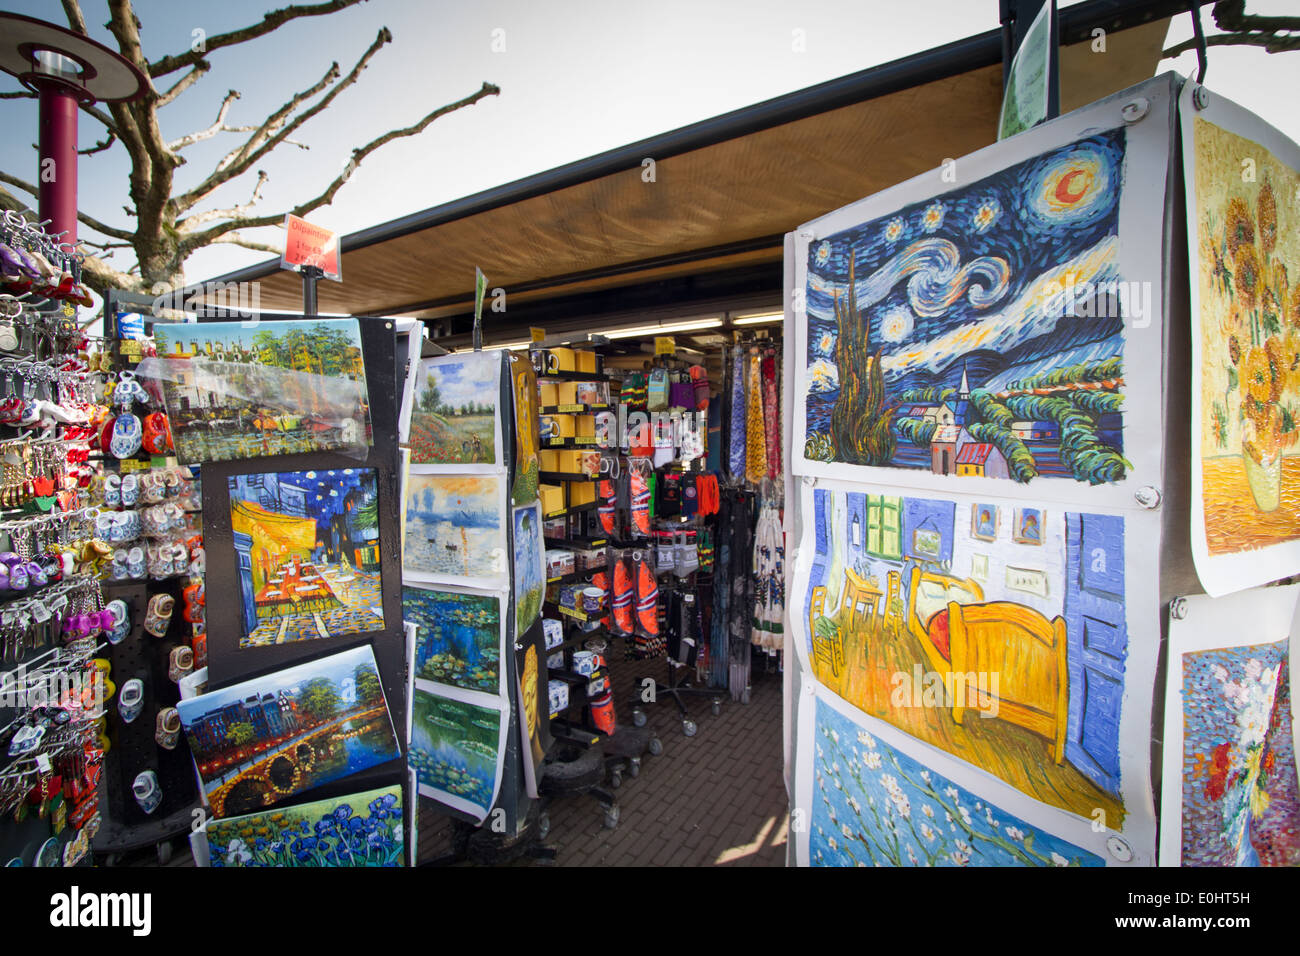 A Stall selling Van Gogh images in Amsterdam museumsquare museumplein Stock Photo